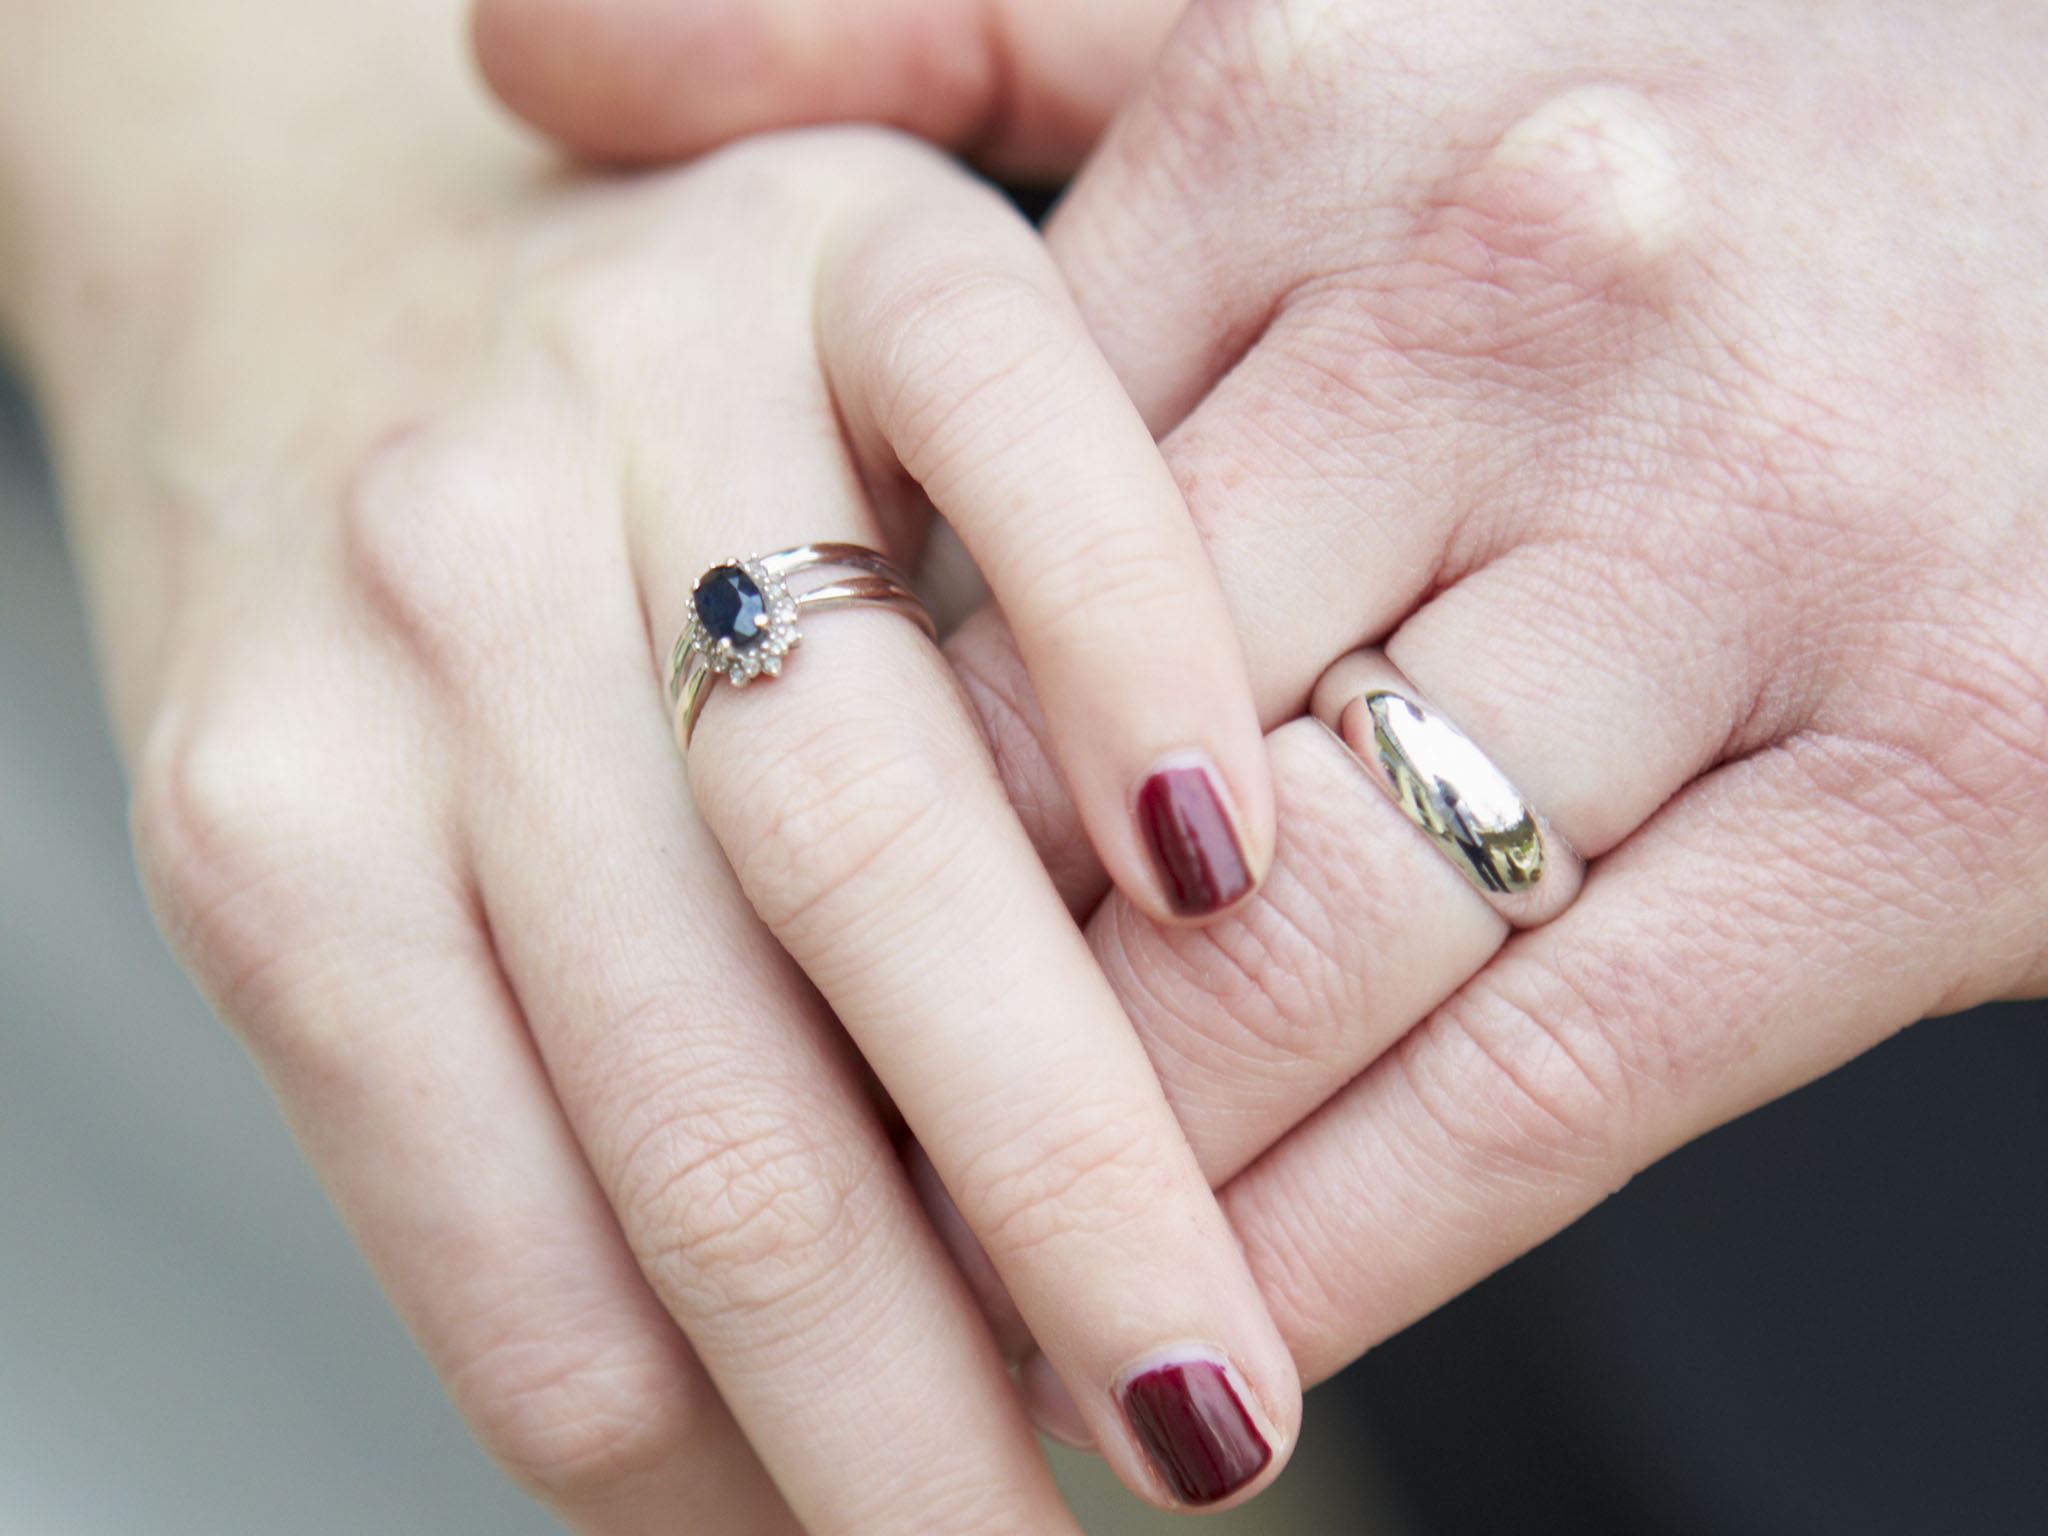 Thumbnail for A tiny government error has affected 20,000 divorced people